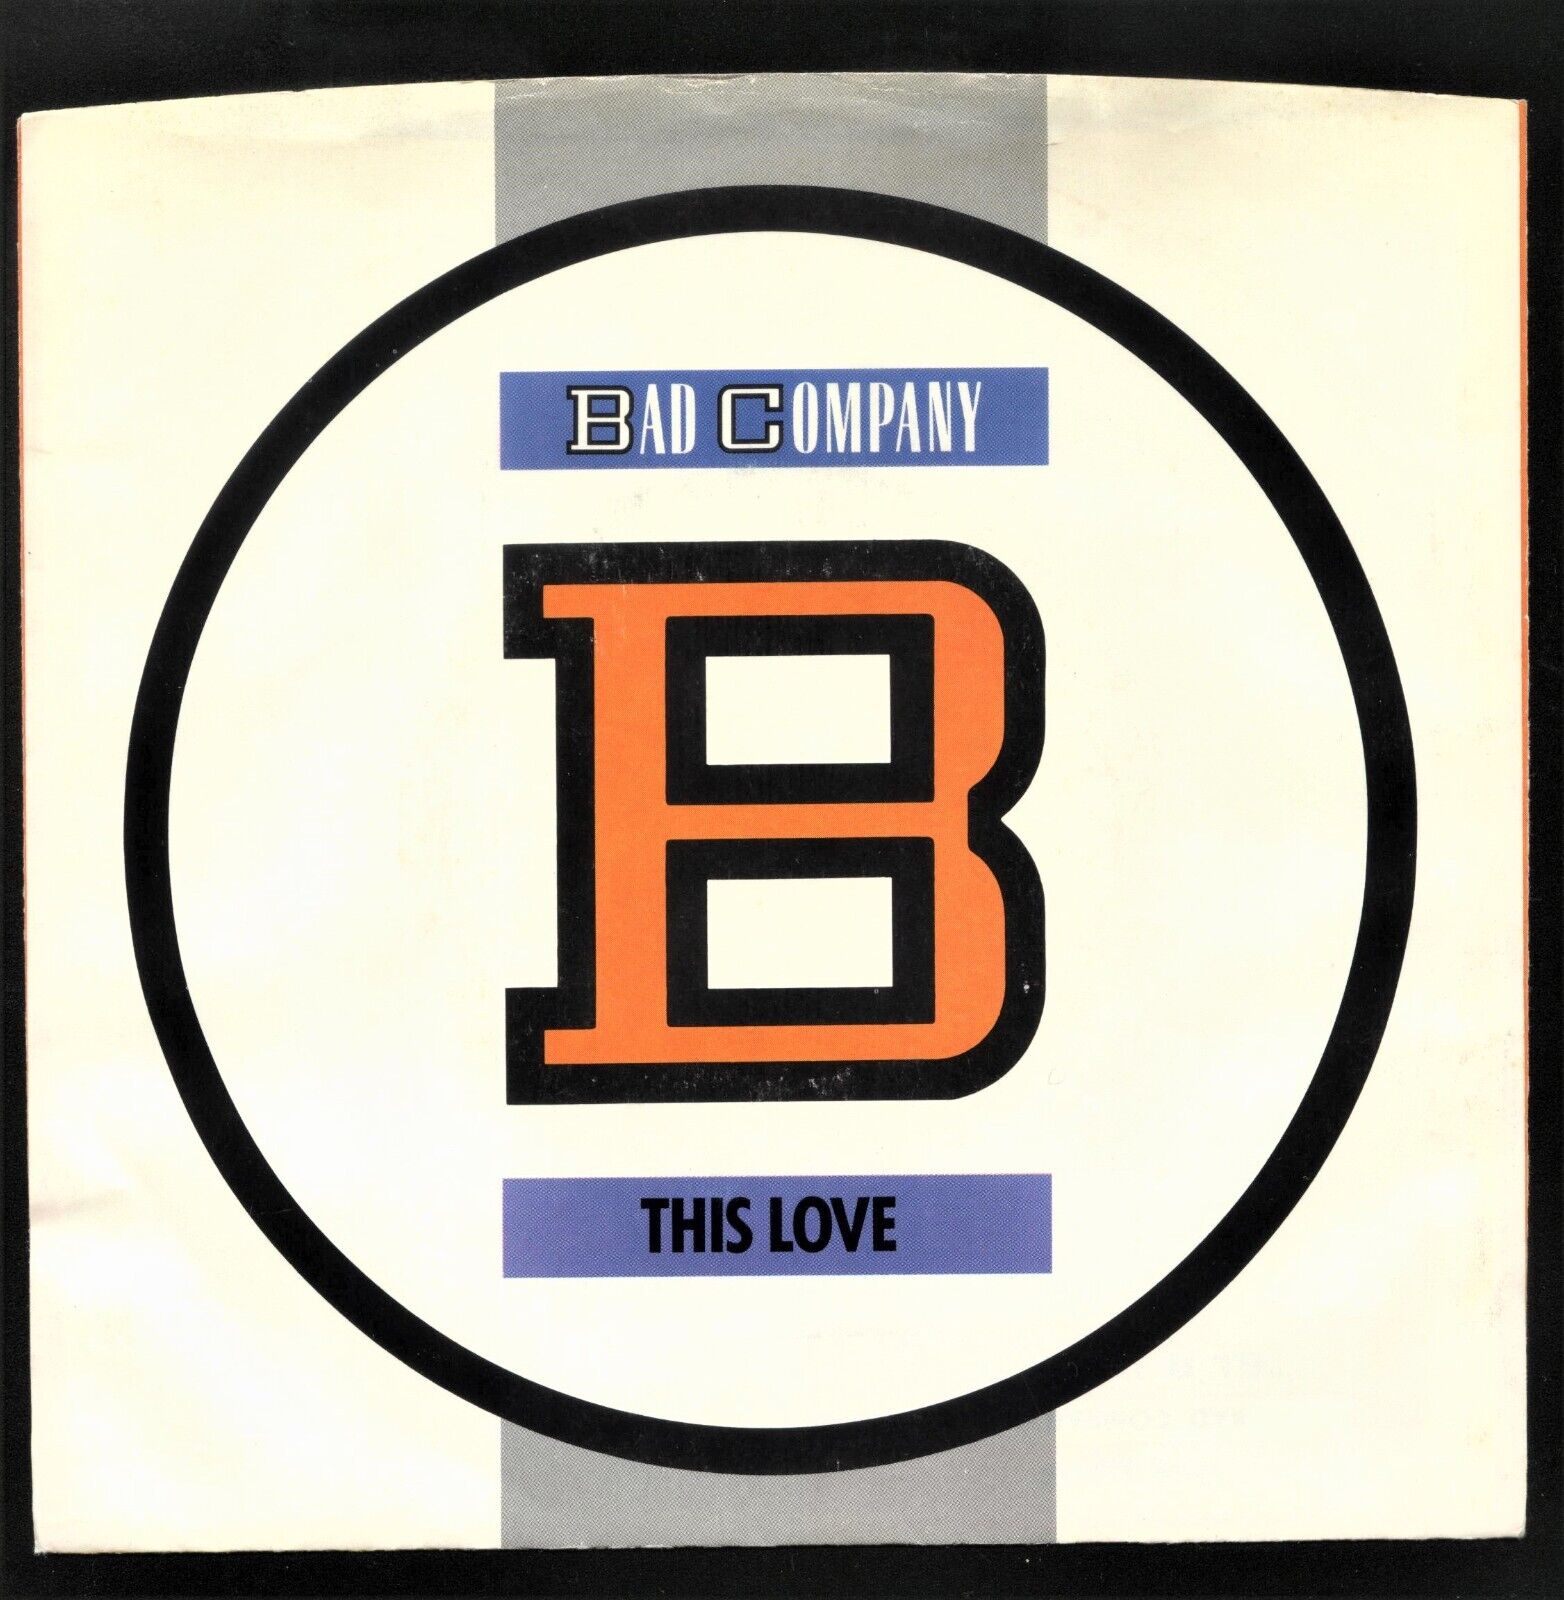 "This Love" by Bad Company 7" 45 RPM (7-89355) 1986 - SLEEVE ONLY